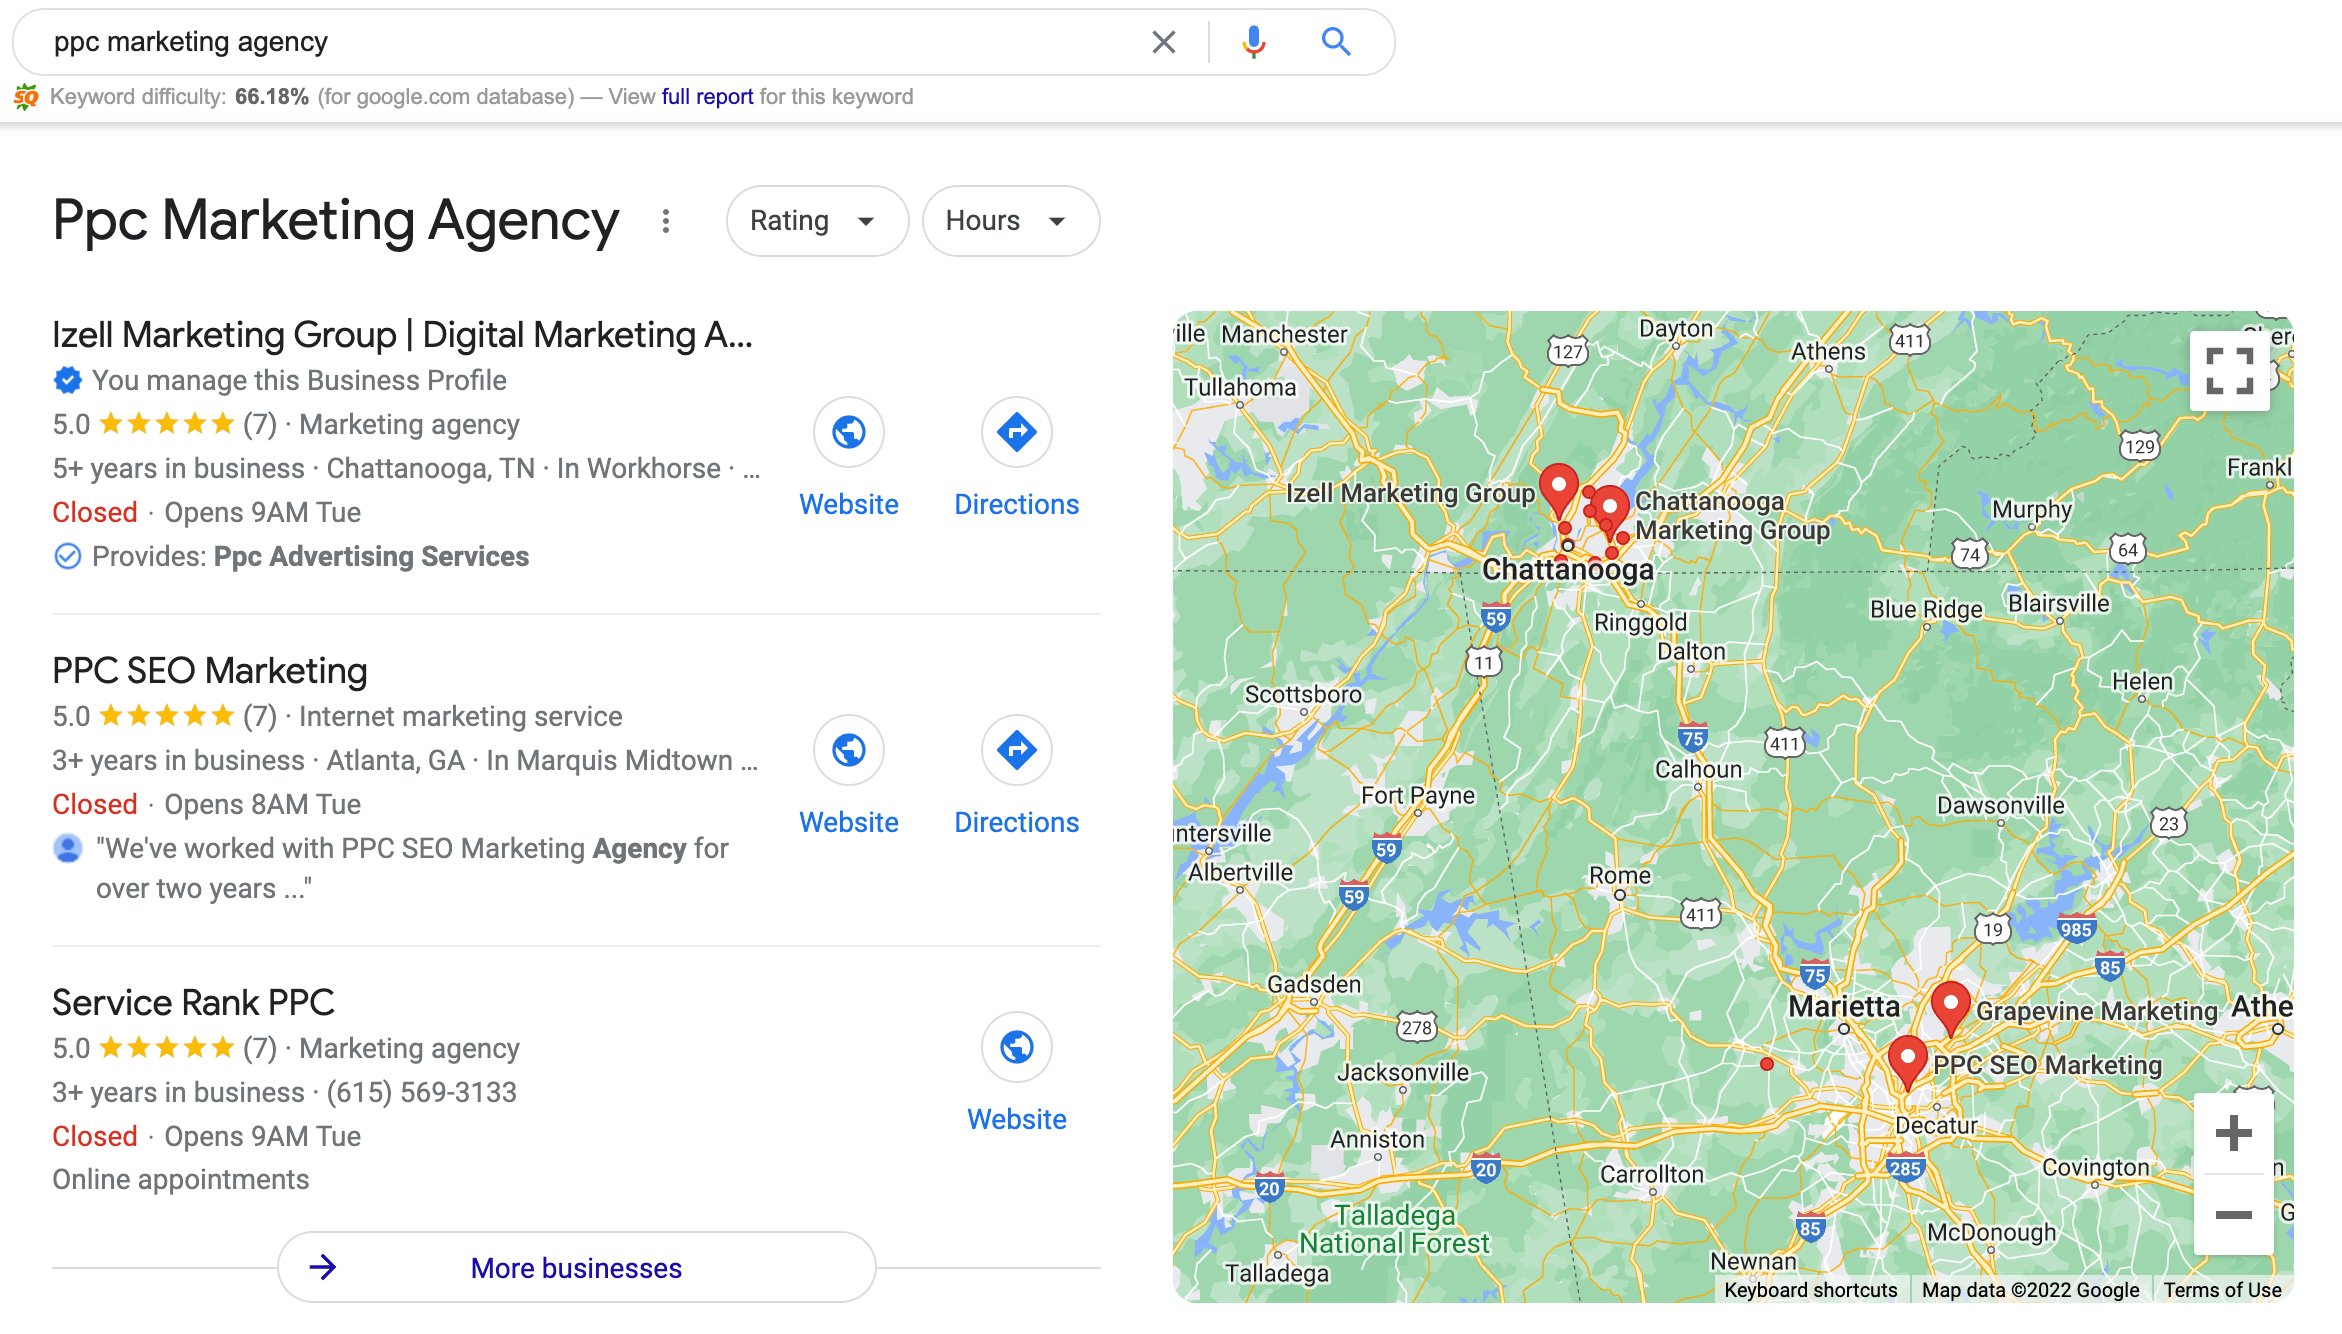 Google search for ppc marketing agency that shows google map results